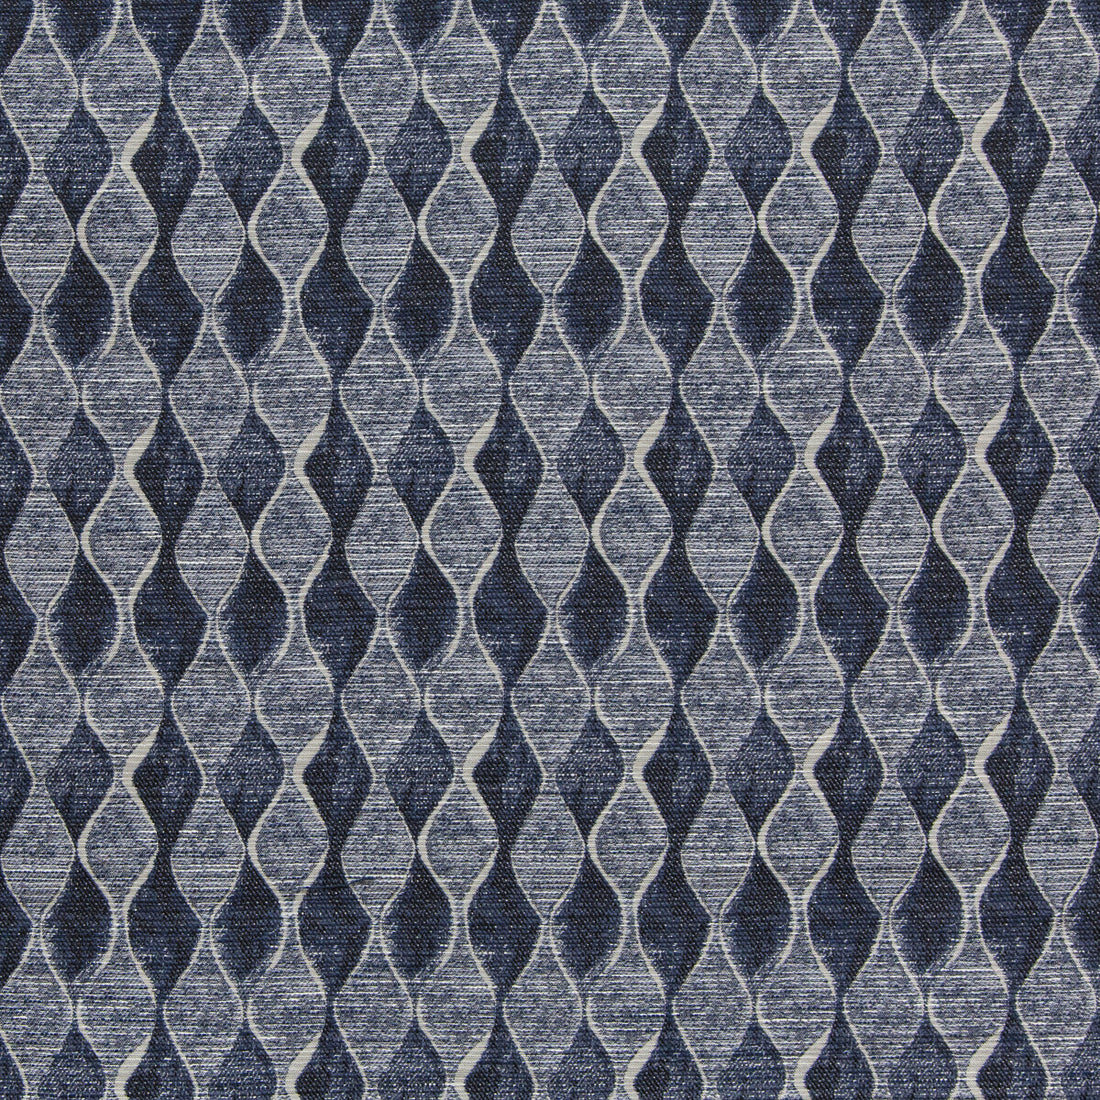 Baja Bound fabric in navy color - pattern 35832.50.0 - by Kravet Design in the Indoor / Outdoor collection